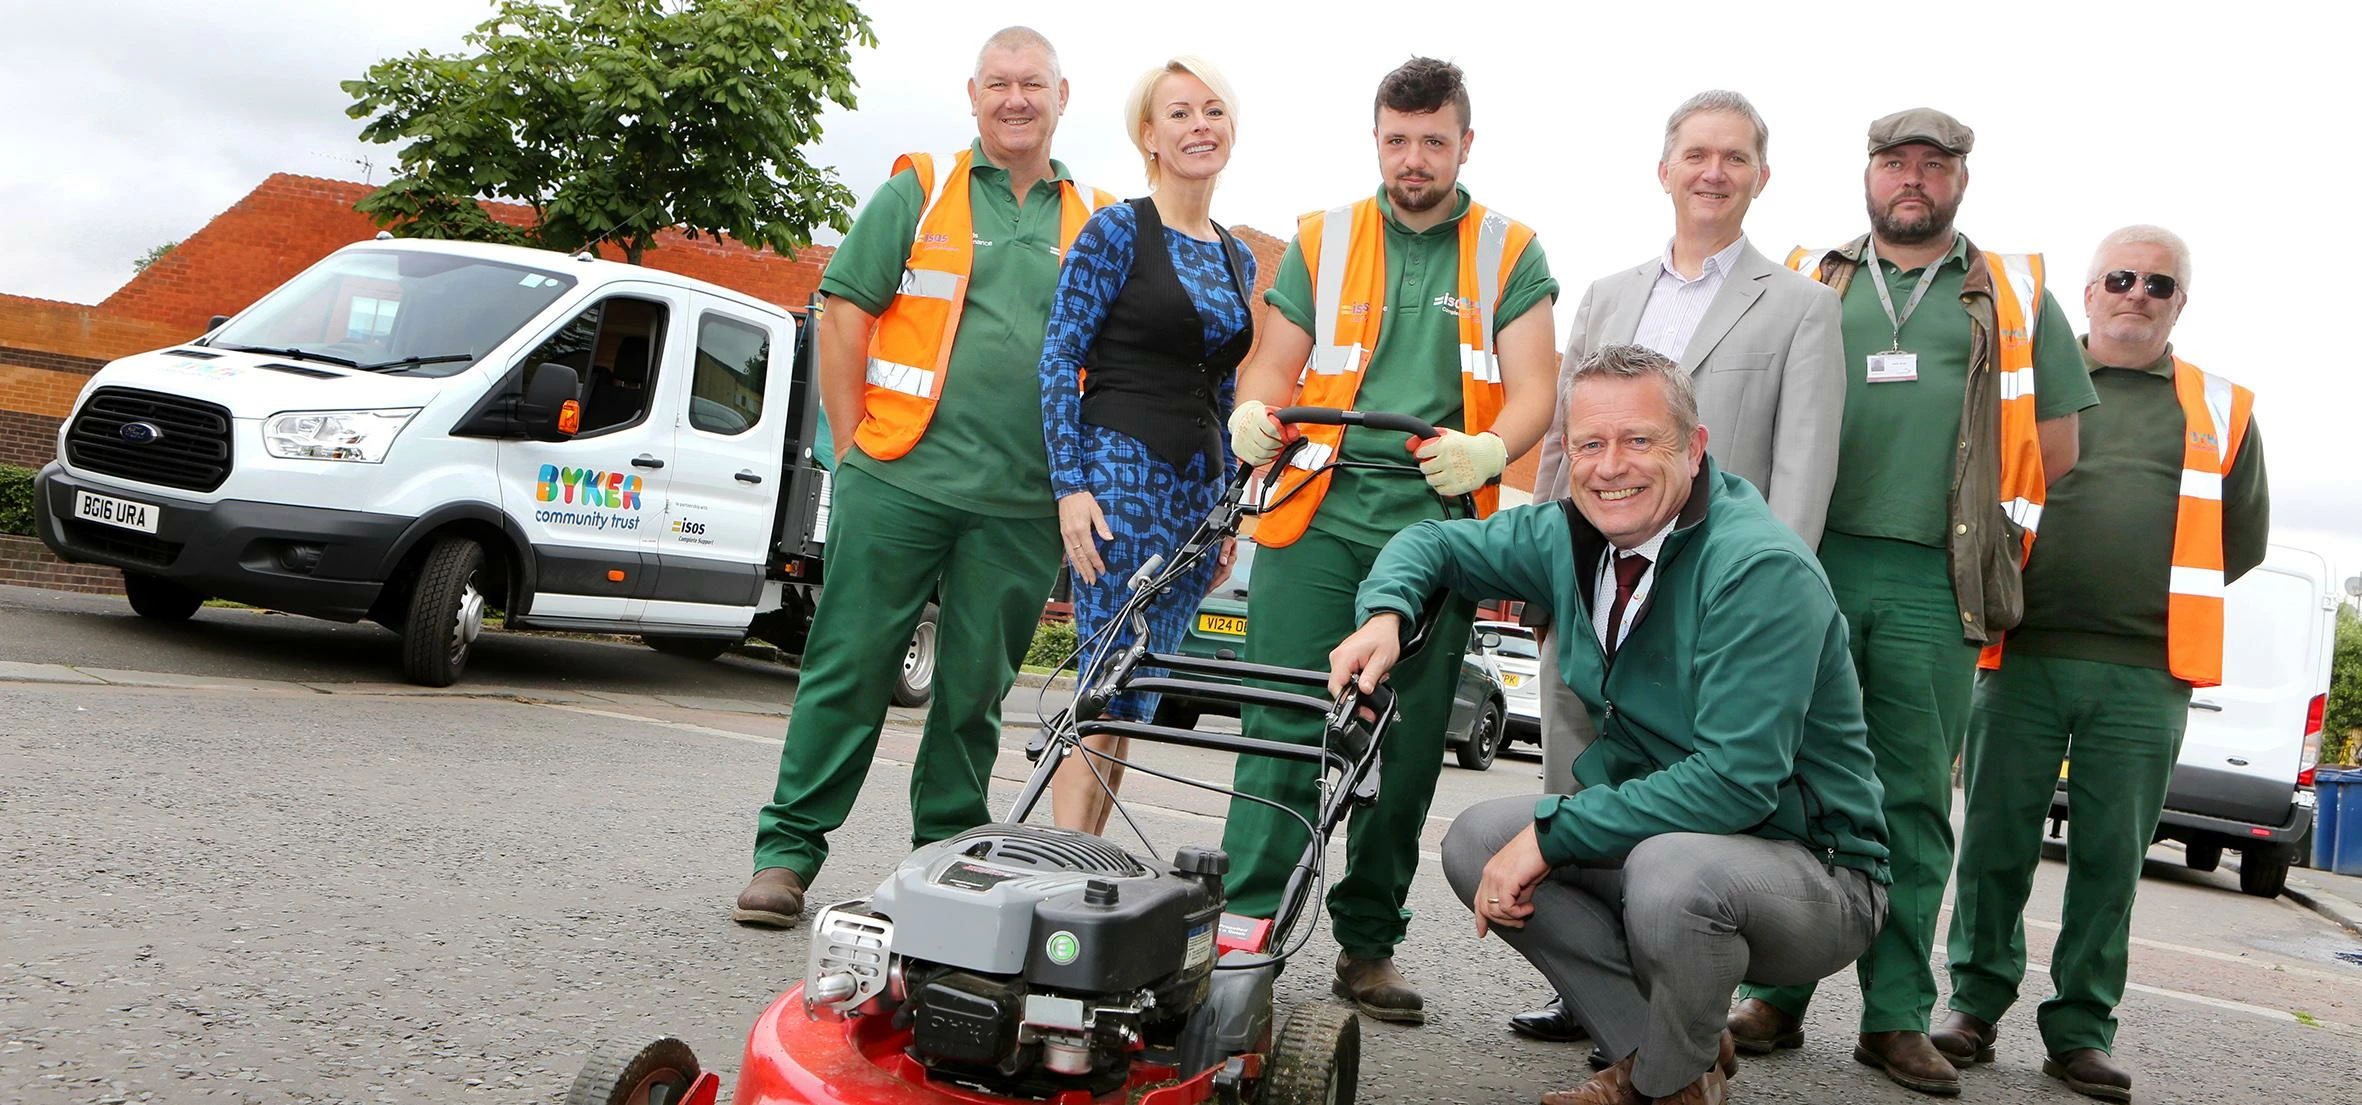 Byker residents have praised the new grounds maintenance and environmental response service launched